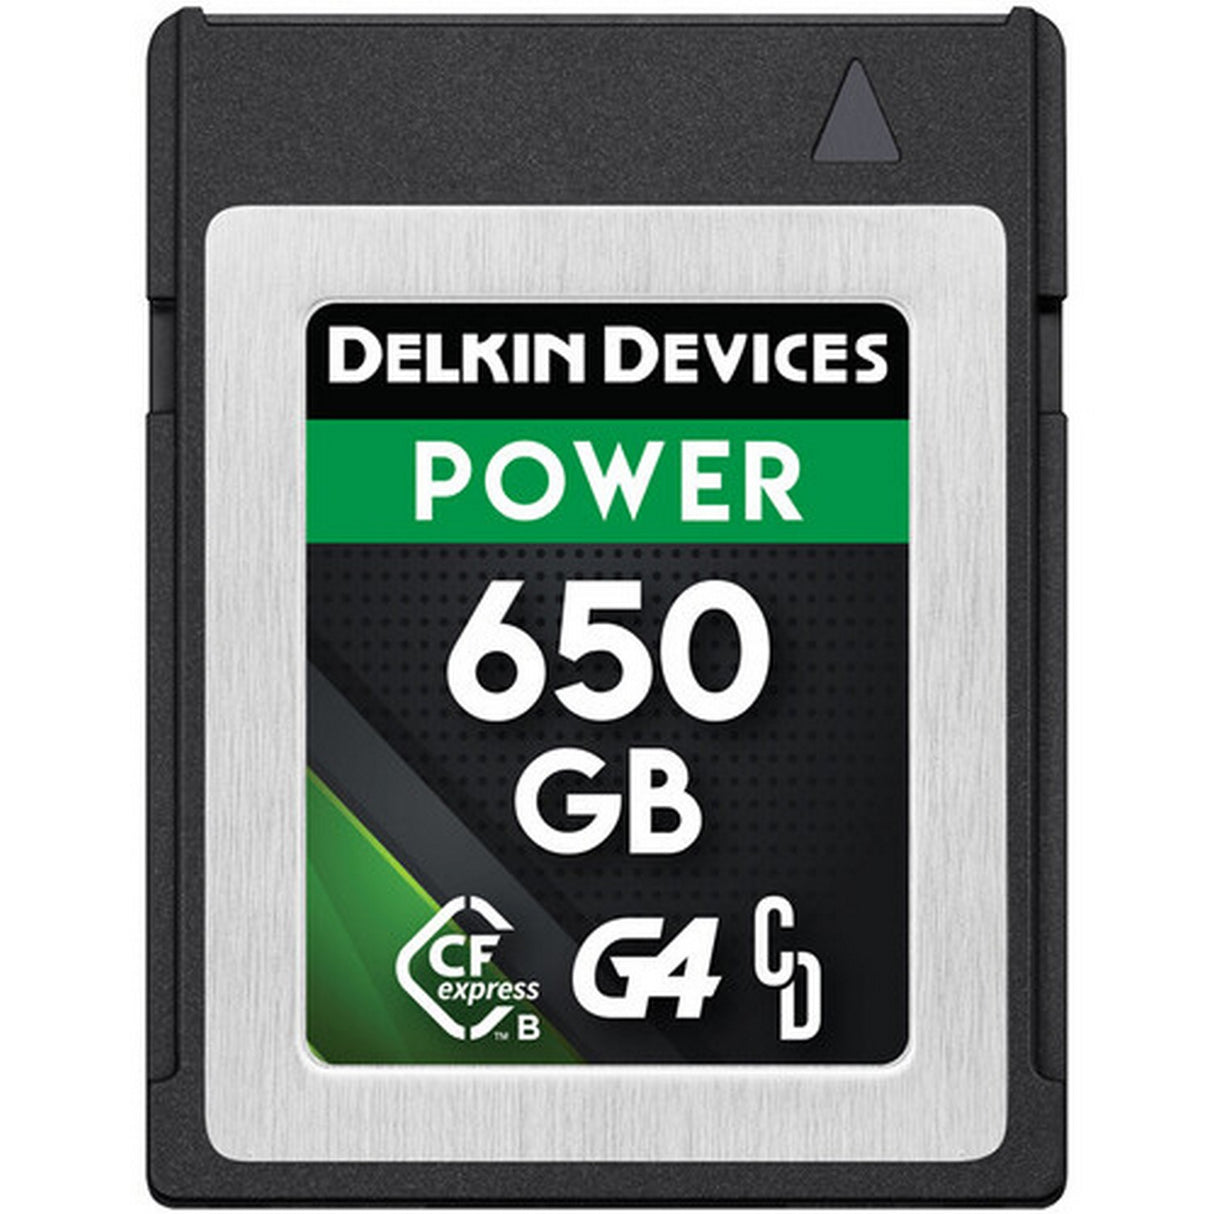 Delkin Devices CFexpresss Power Type B Memory Card, 650GB